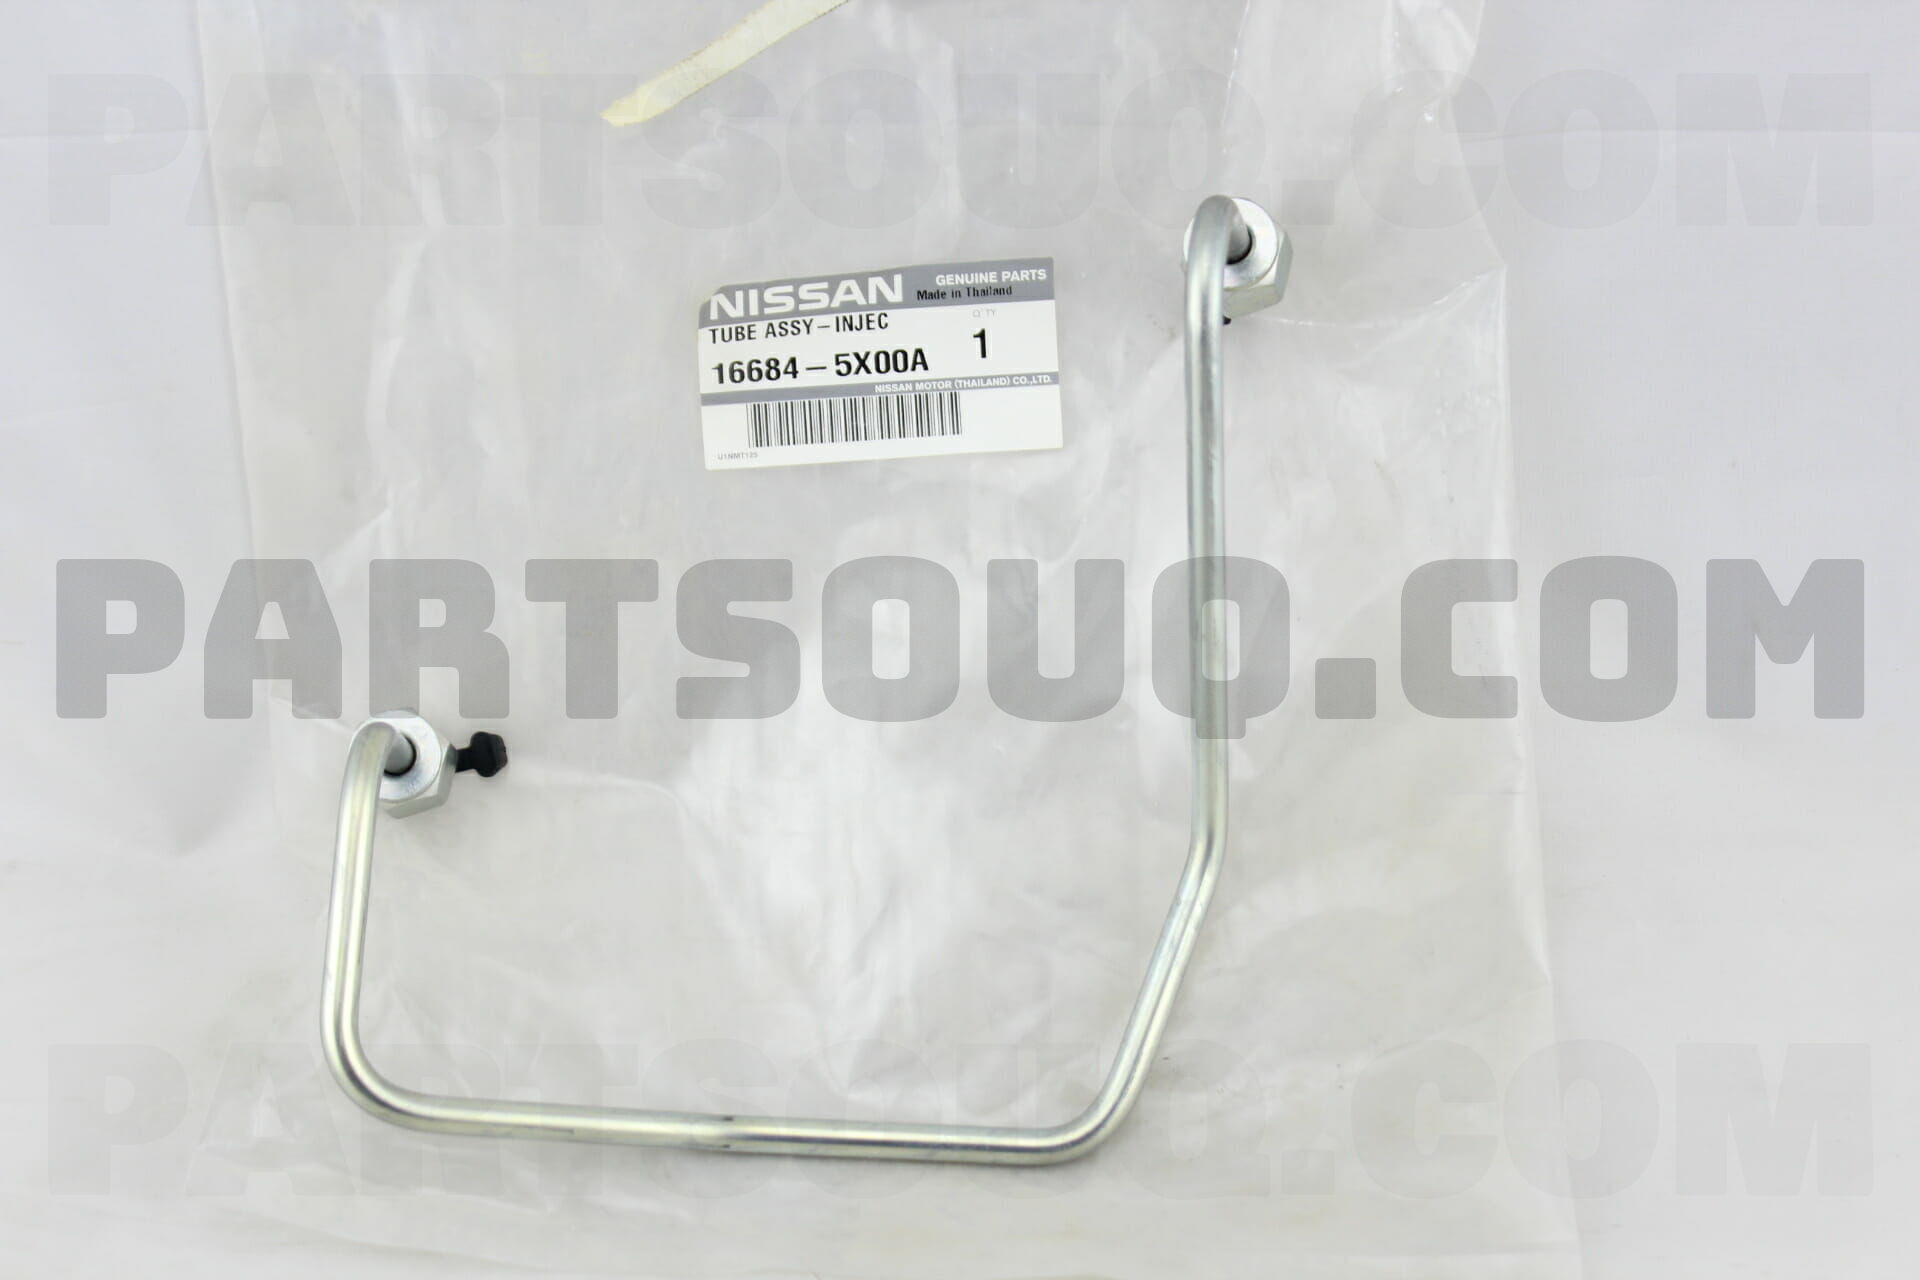 166845X00A Nissan TUBE ASSY-INJECTION,NO 5